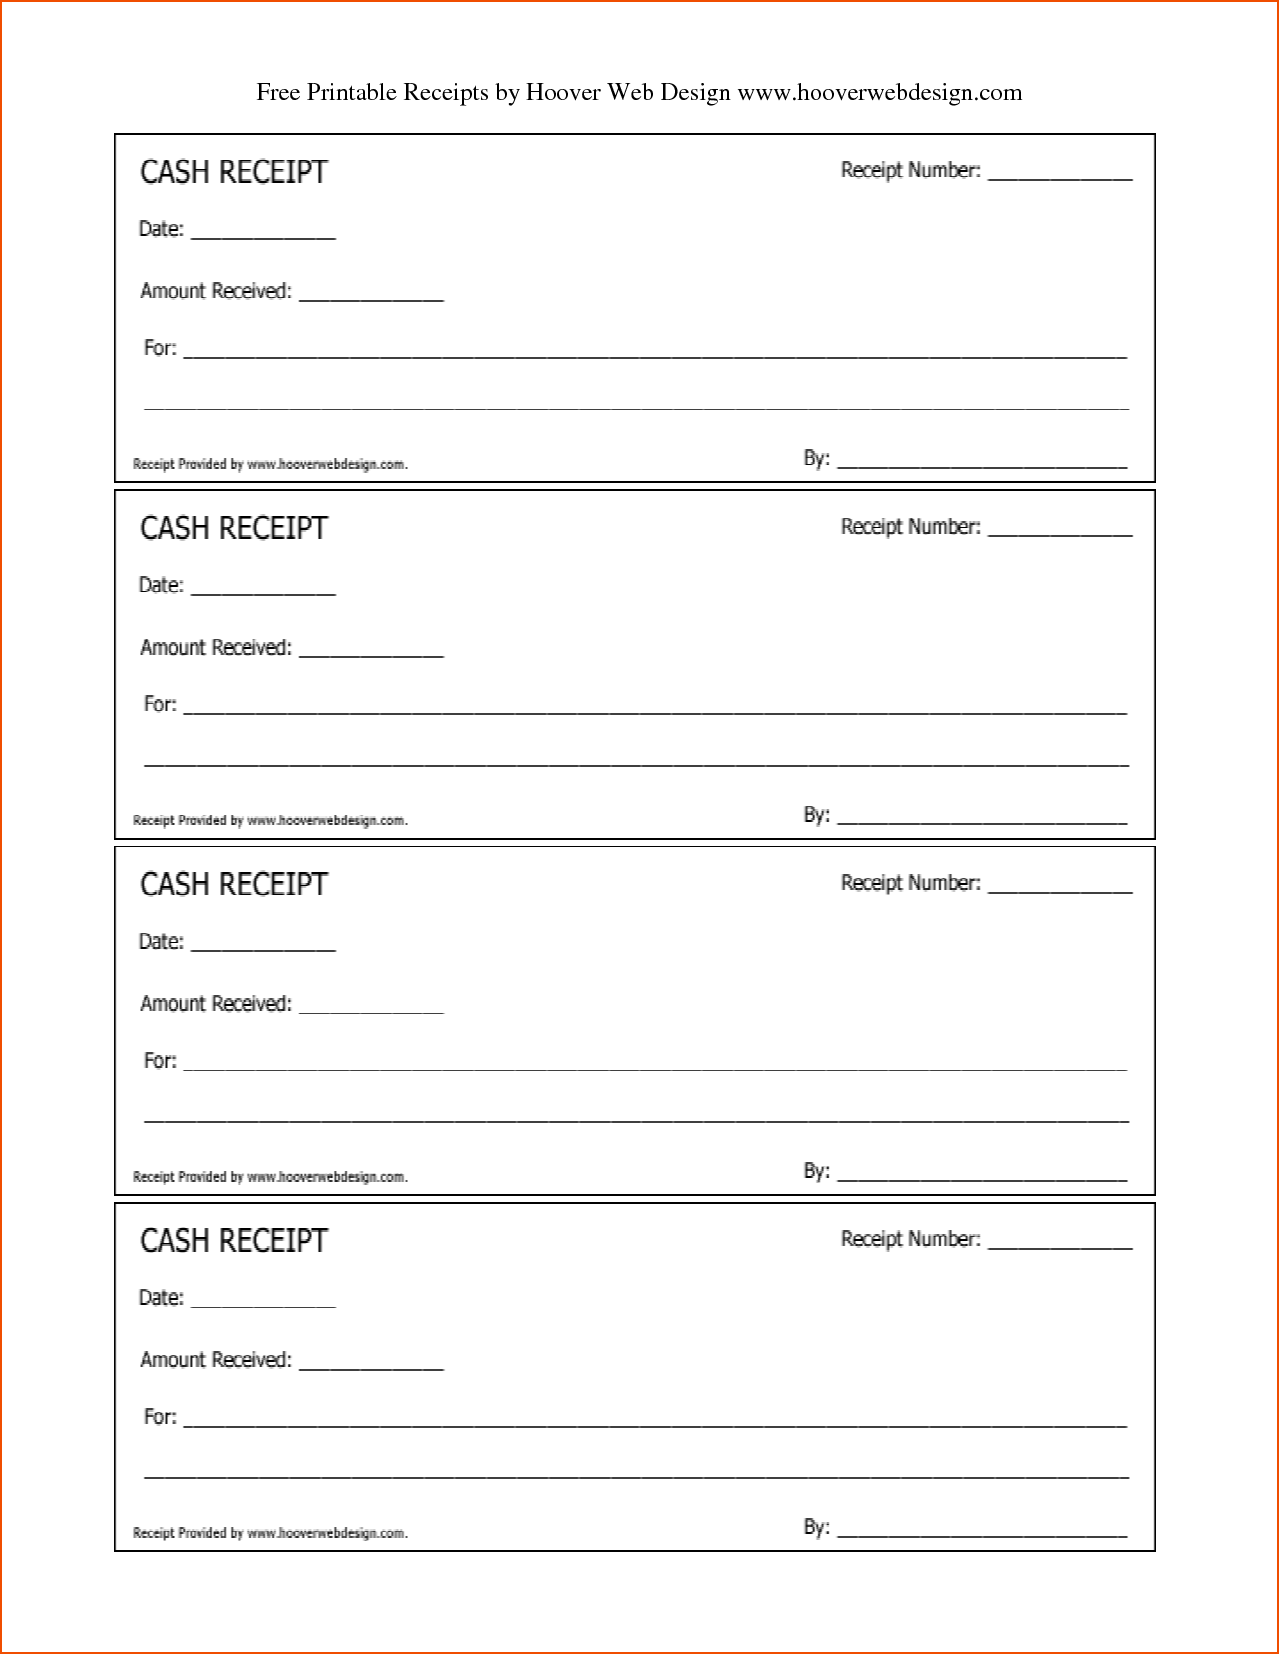 Free Printable Receipts For Cash